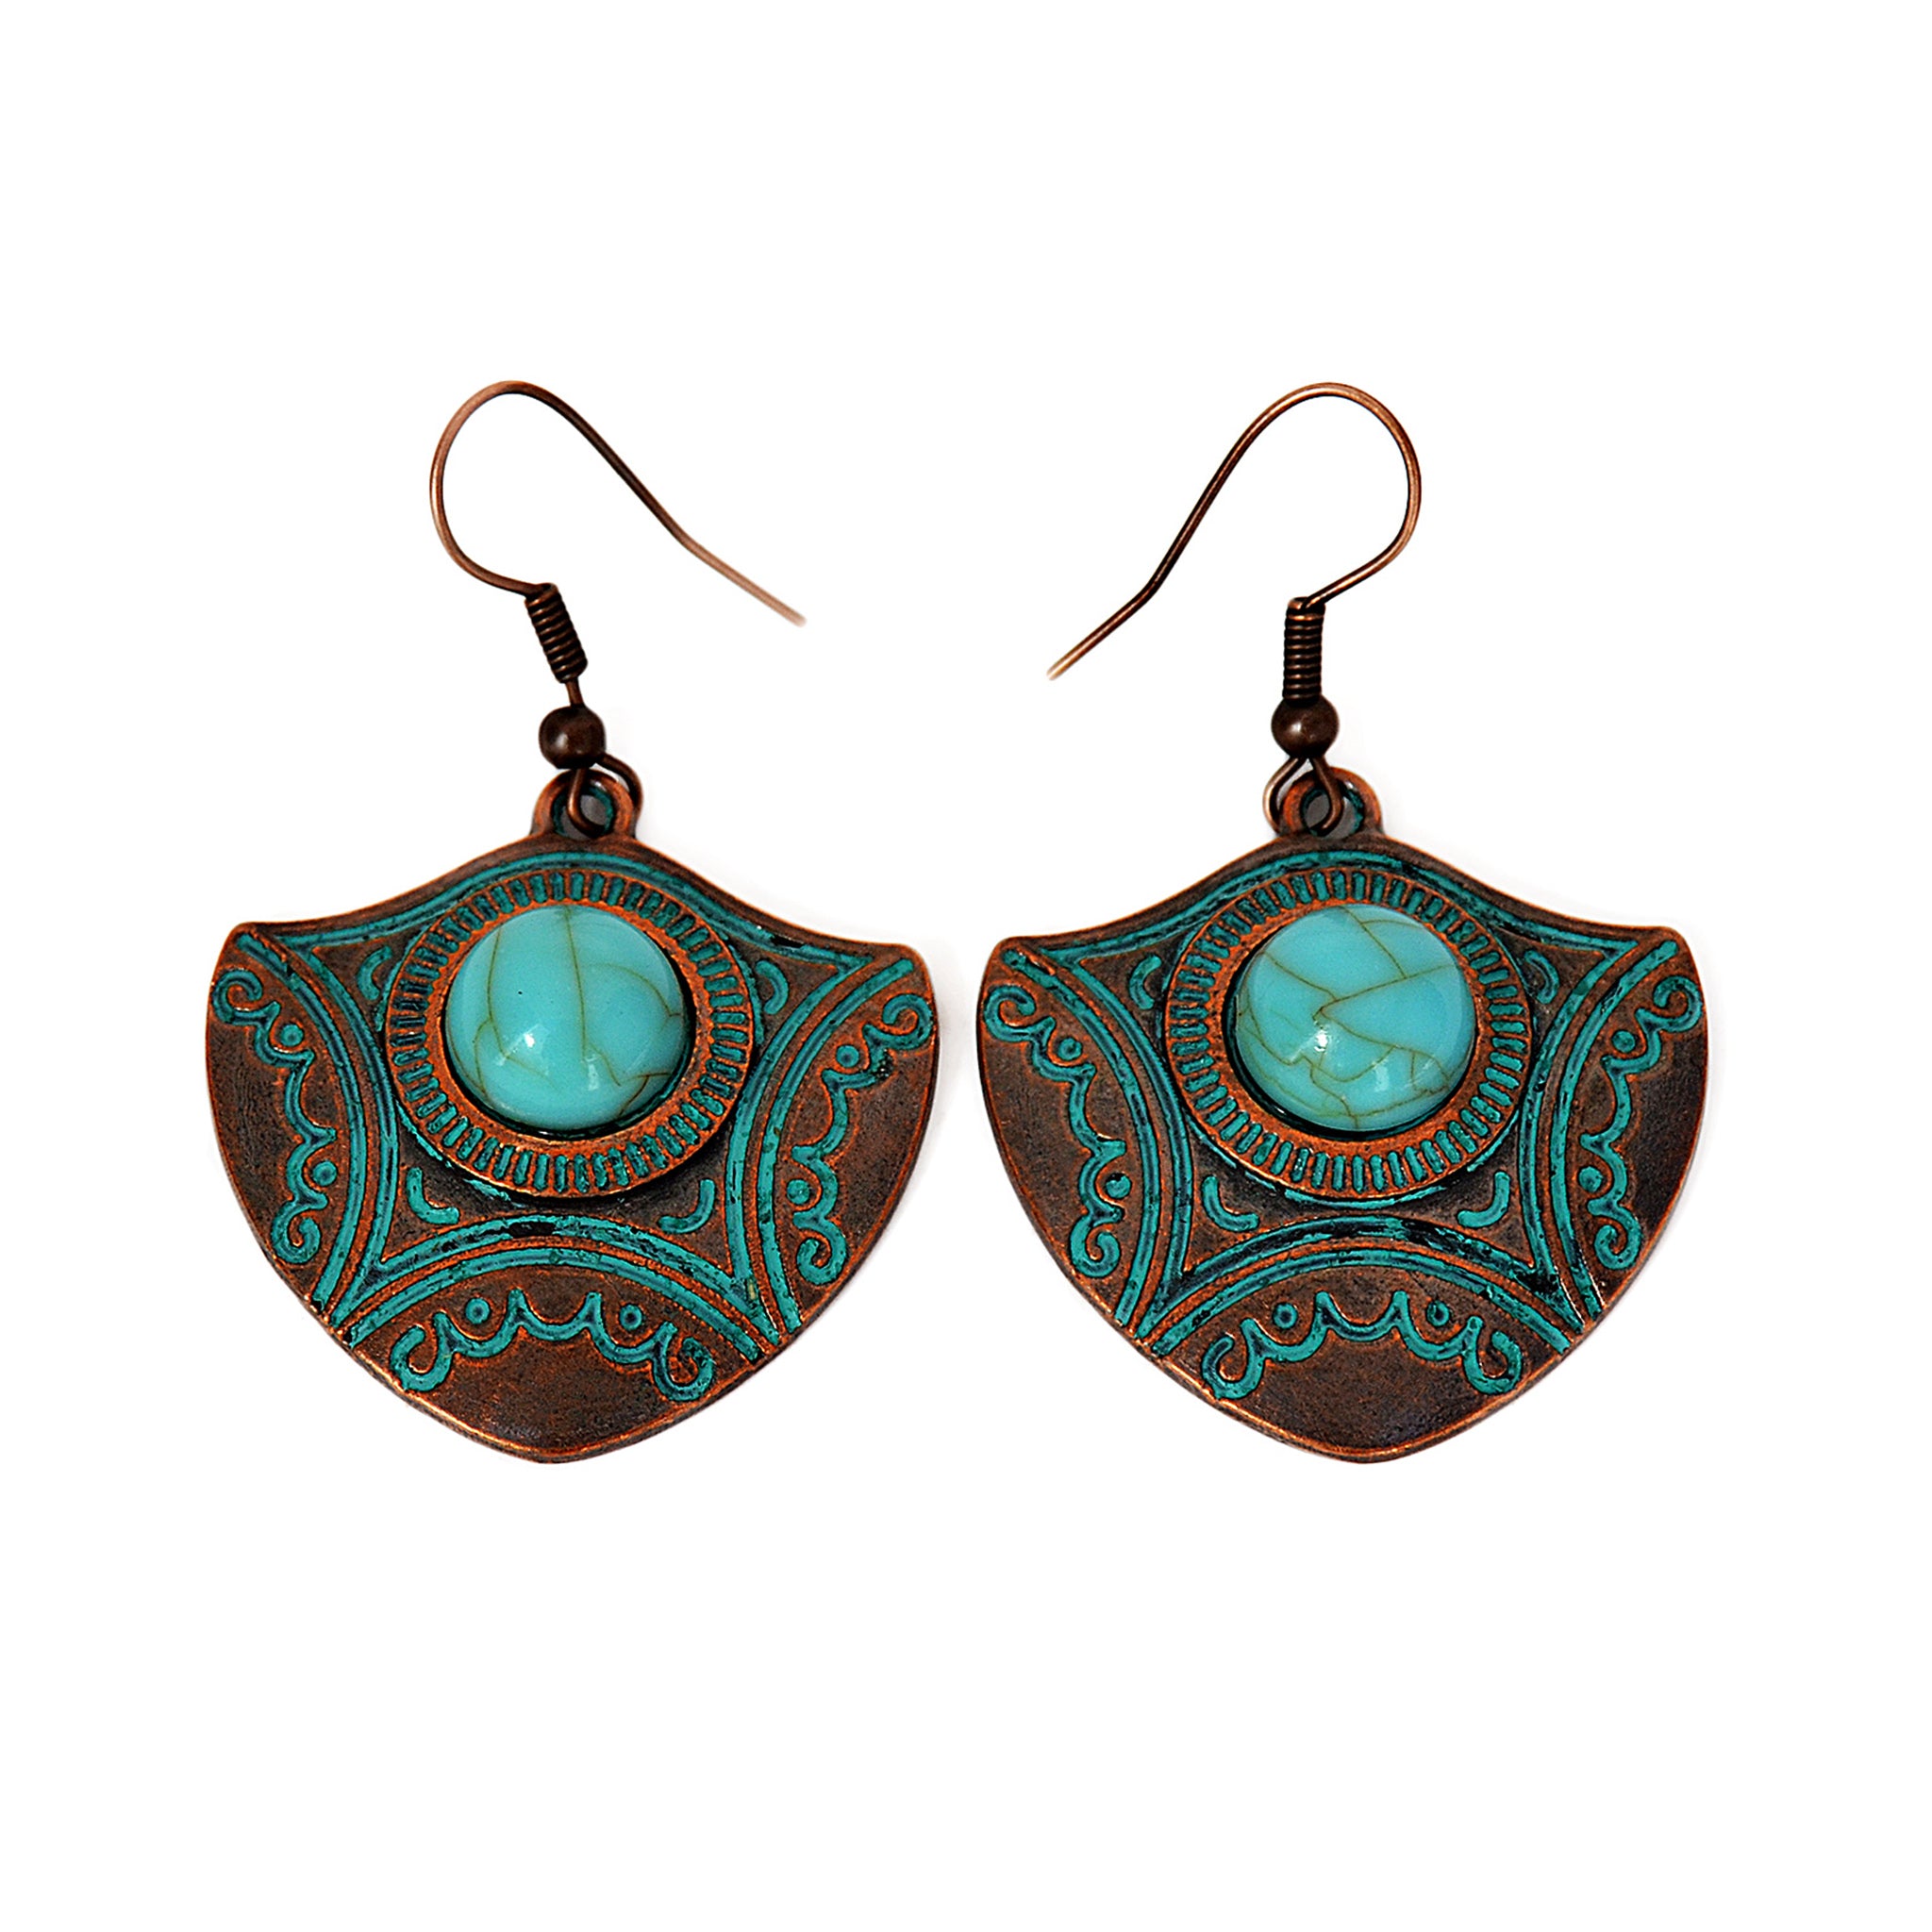 Tribal arrow earrings with turquoise bead and old blue patina on copper